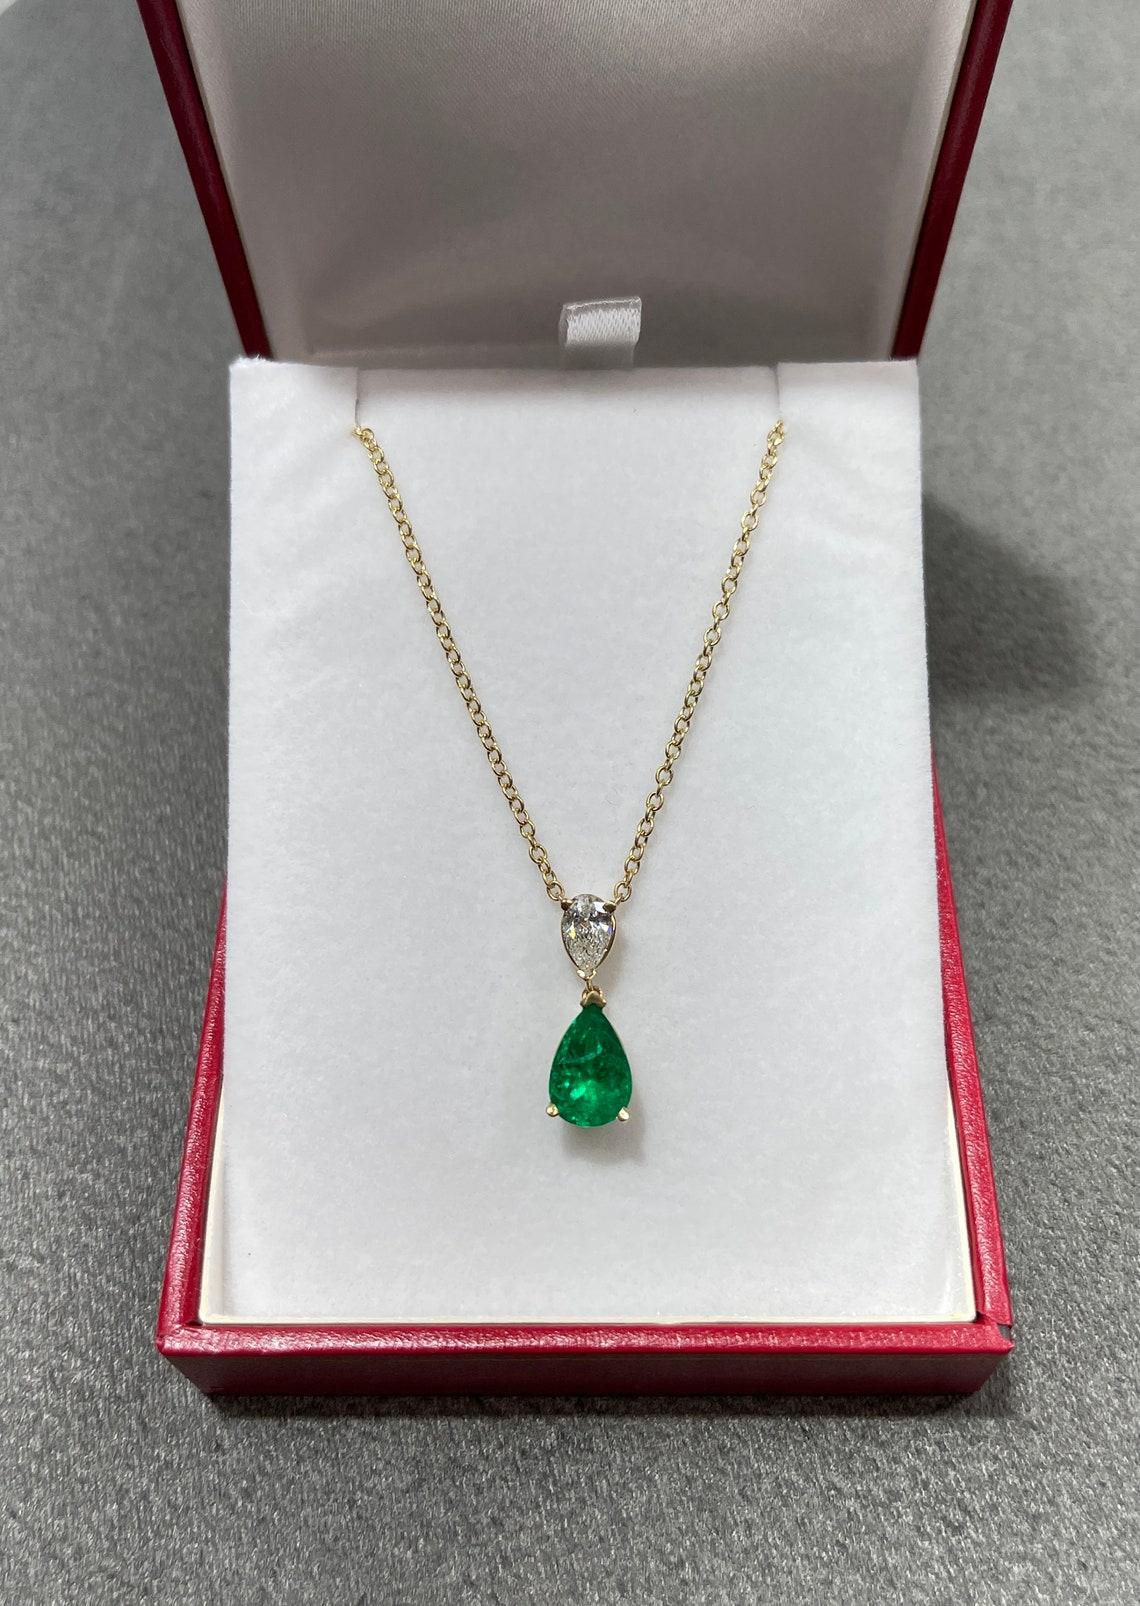 Take a look at this stunning Colombian emerald and diamond necklace. The natural, AAA+ high-quality Colombian emerald carries a full 2.12-carats of dark, vivid green color. The stone displays excellent luster and eye clarity. Accented at the top, is